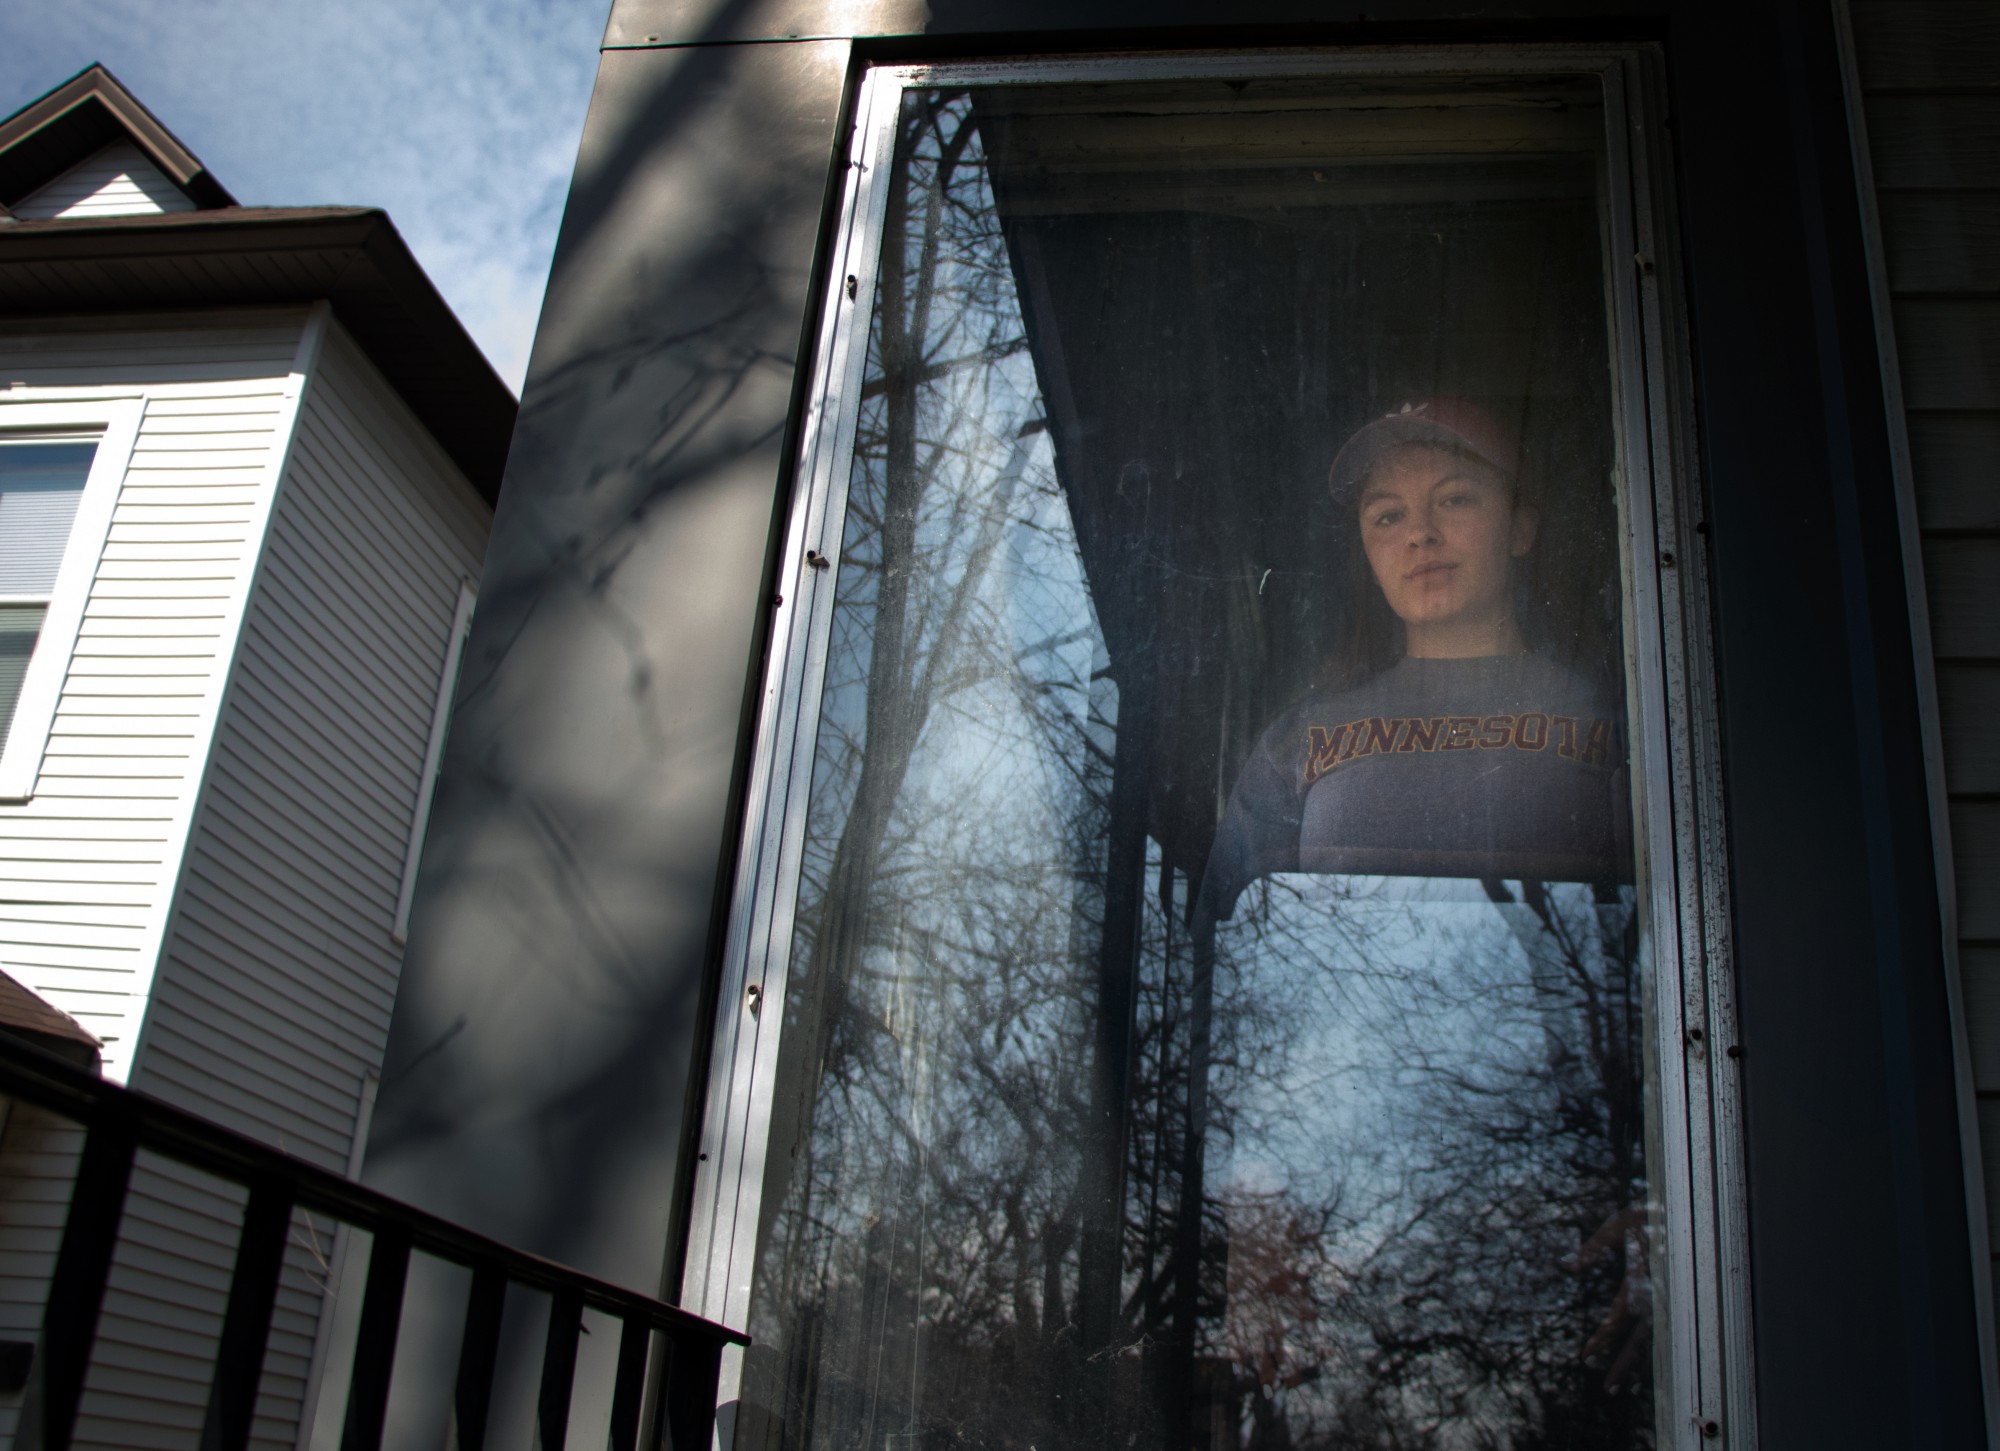 Third-year student Natalie Swanson poses for a portrait at the house she rents in Marcy-Holmes on Wednesday, April 1. Swanson was laid off from her job at a coffee shop that stopped operation in response to COVID-19. Though her landlord has lowered rent by one hundred dollars per person, she is uncertain about her ability to make rent after April. 